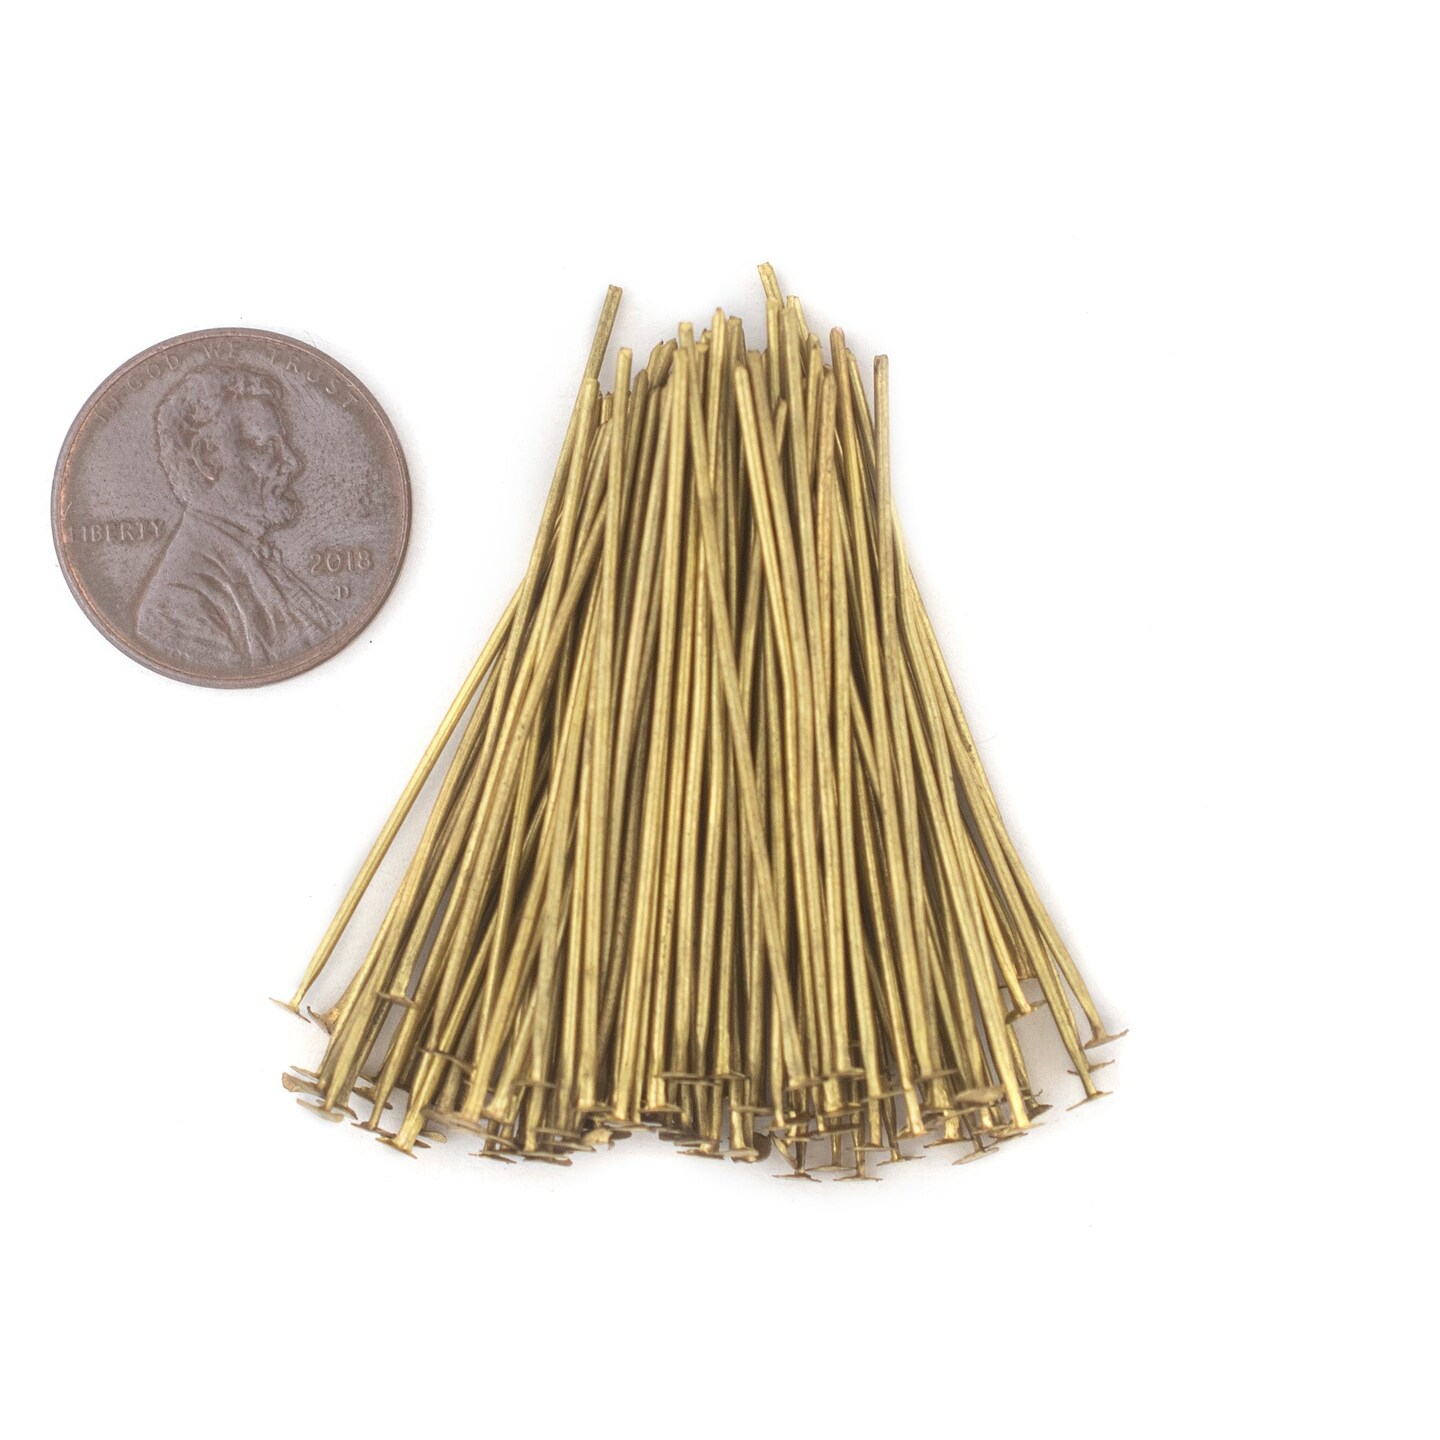 TheBeadChest Brass 21 Gauge 1.5 Inch Head Pins (Approx 100 pieces)